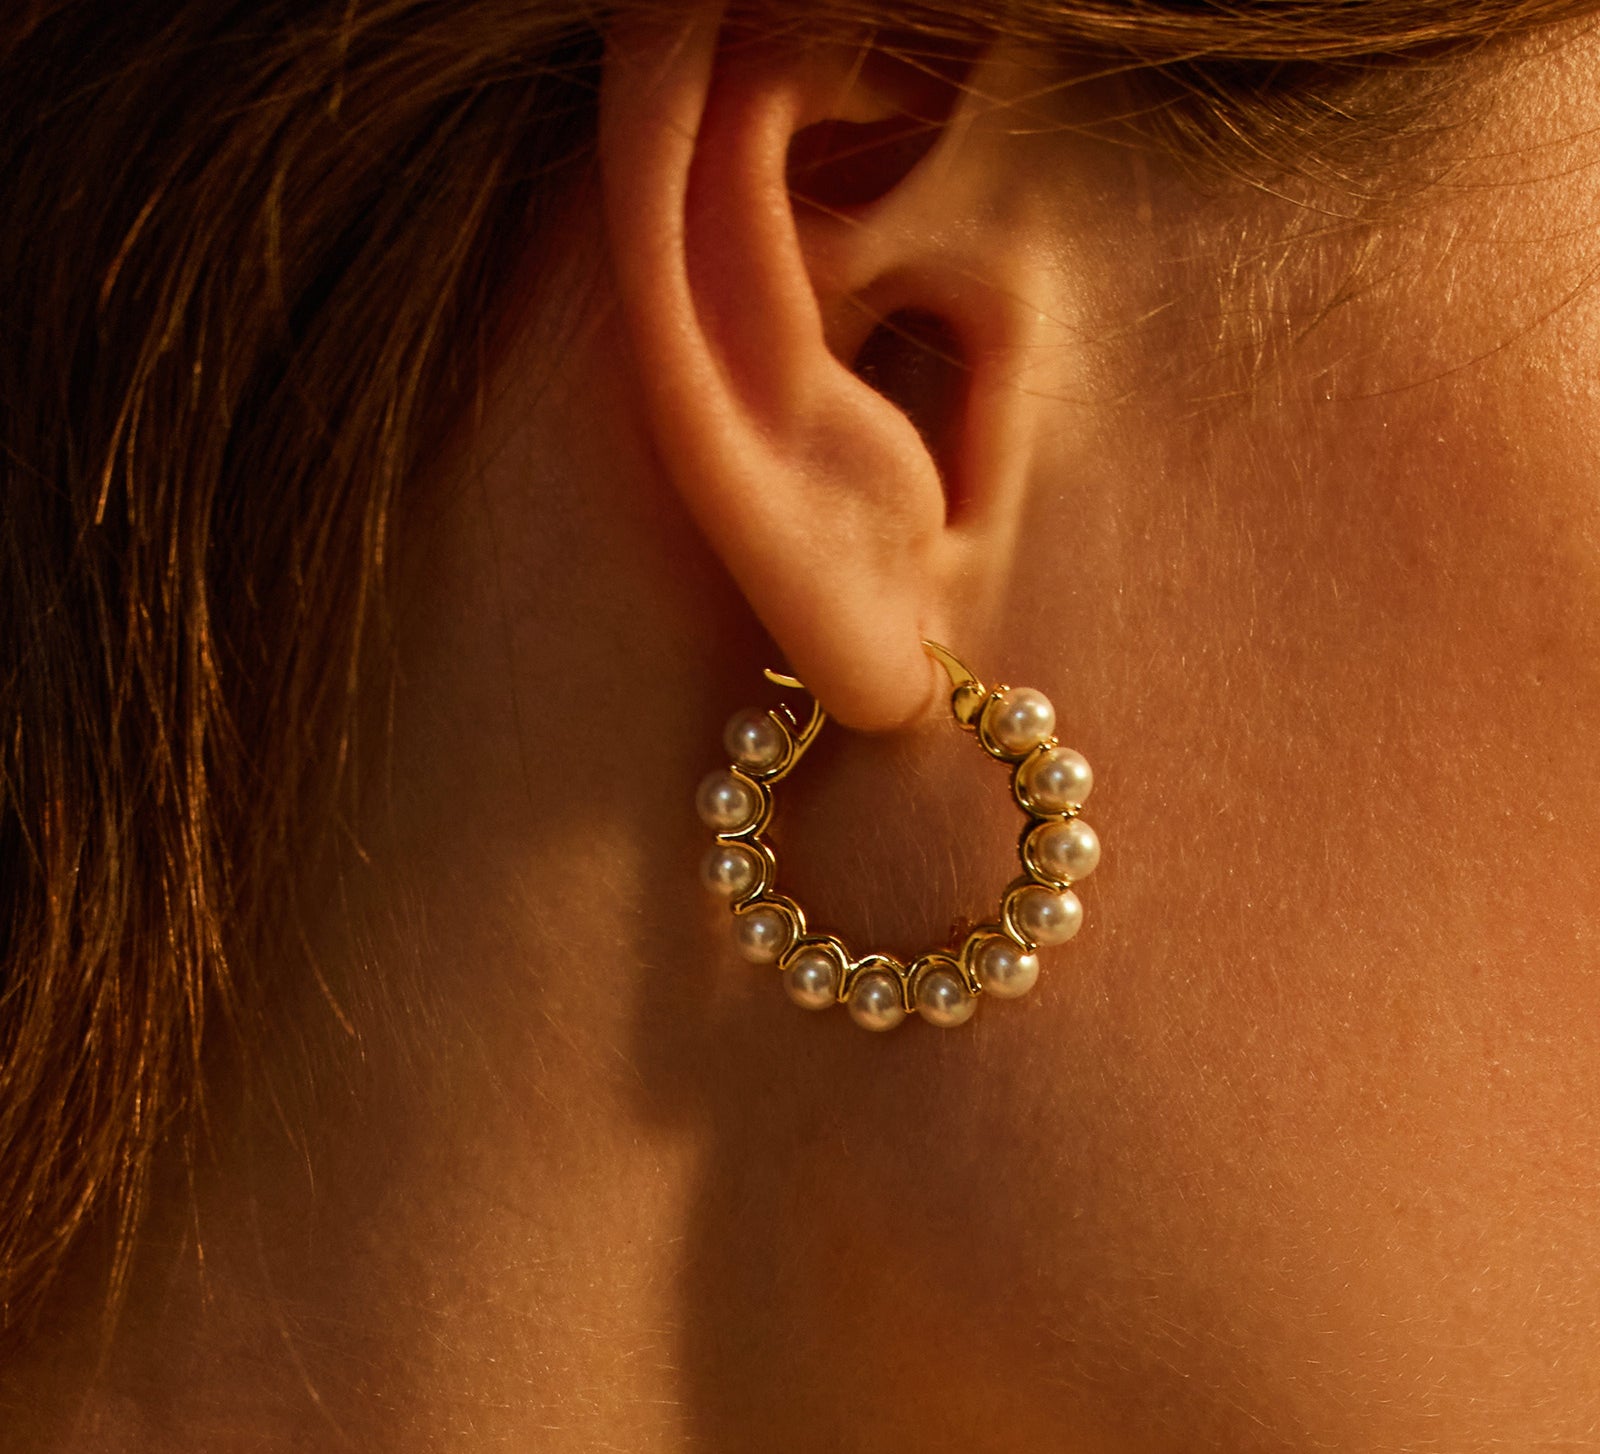  Medium Pearl Huggie Earrings, a classic and timeless design that embraces the ear with medium-sized hoops adorned with lustrous pearls for a touch of sophistication.